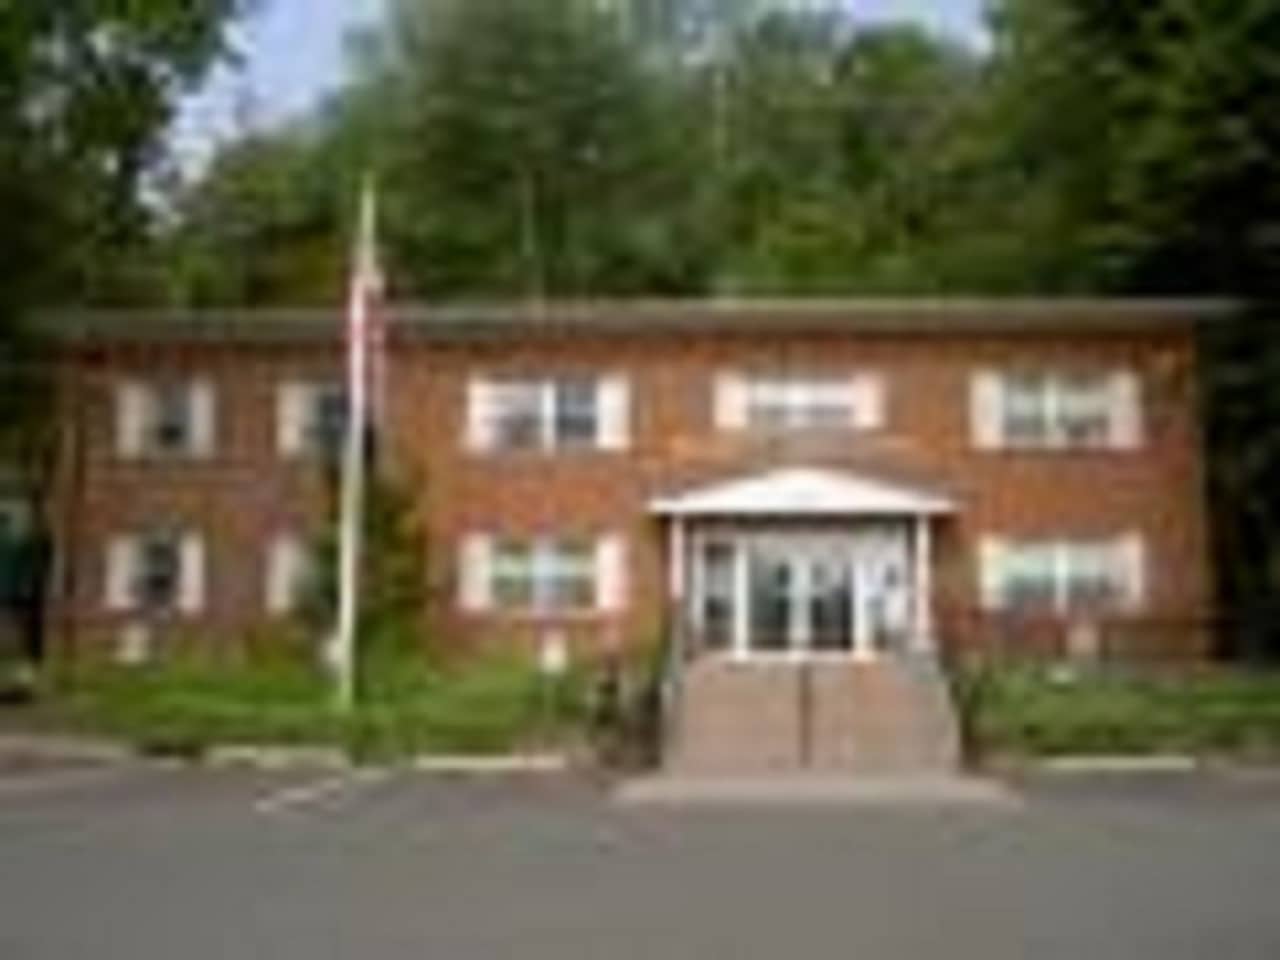 Demarest Borough Hall is where the mayor and council have public meetings.